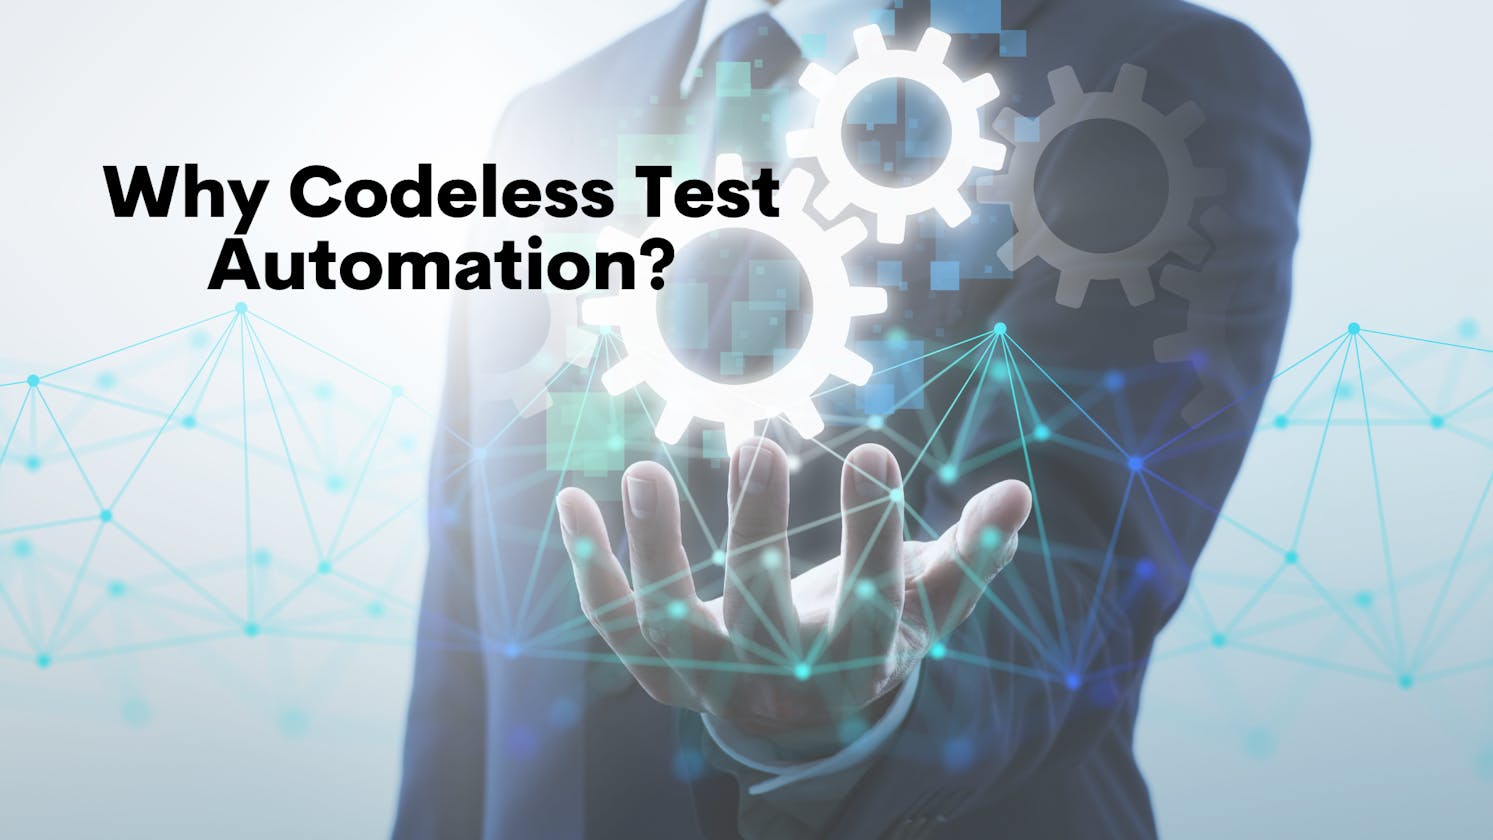 Why Codeless Test Automation?